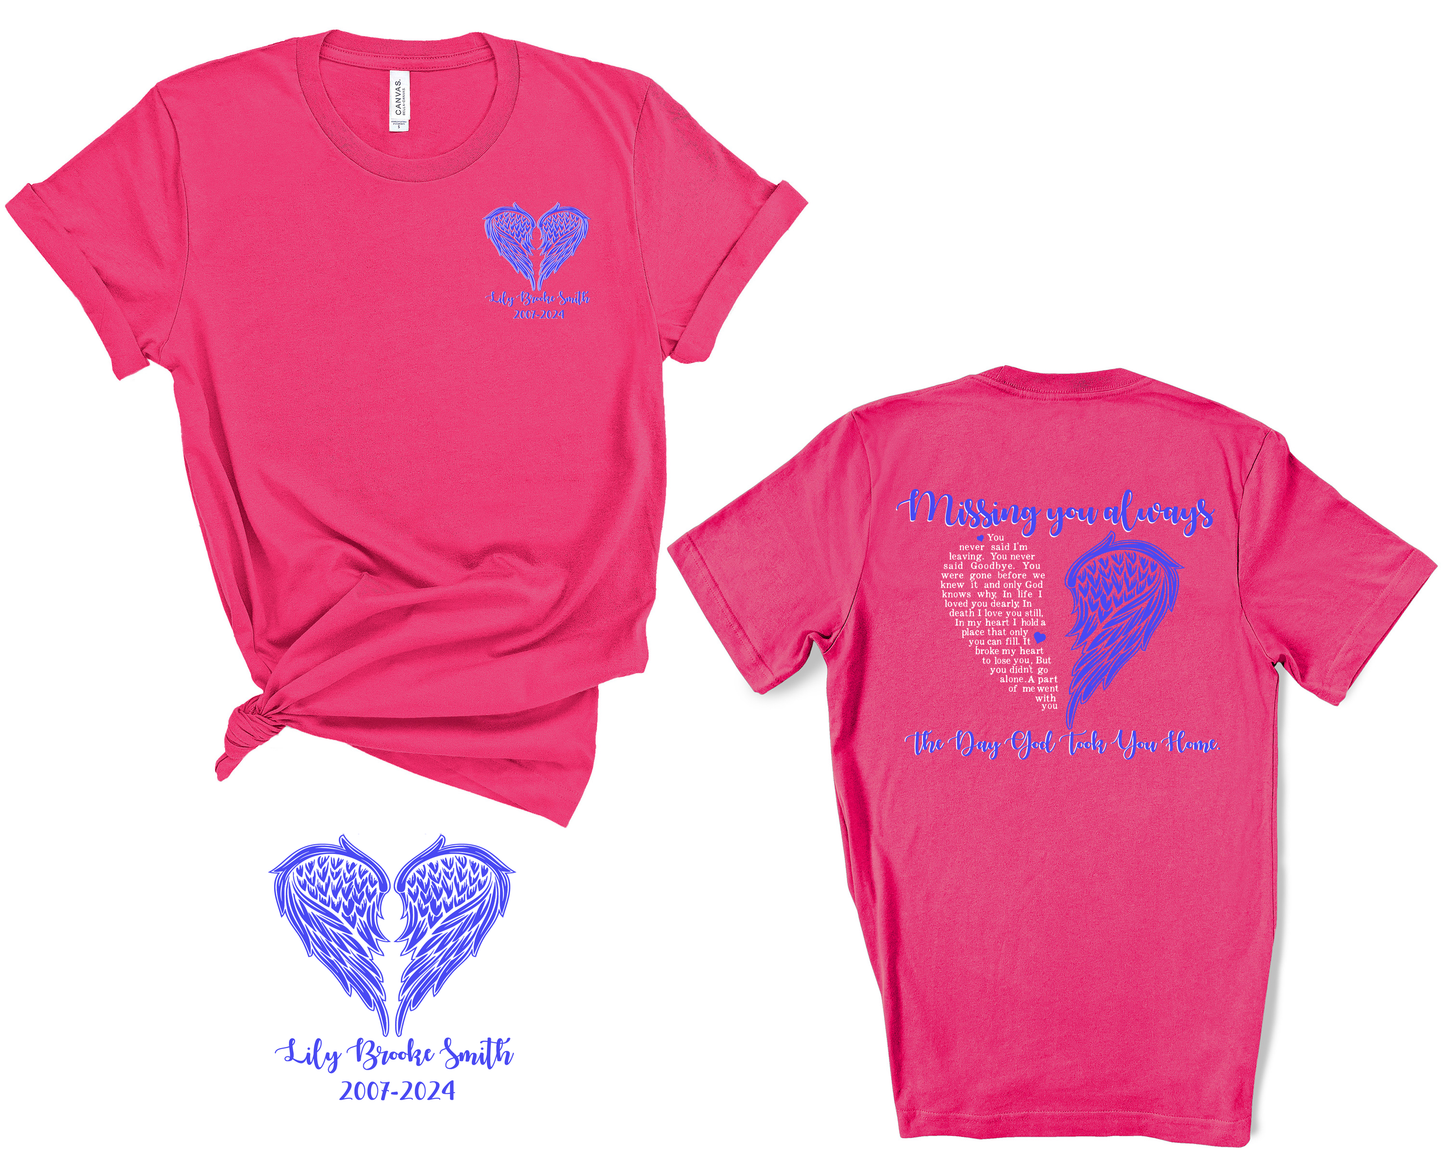 Lily Brooke Smith Tshirt Fundraiser